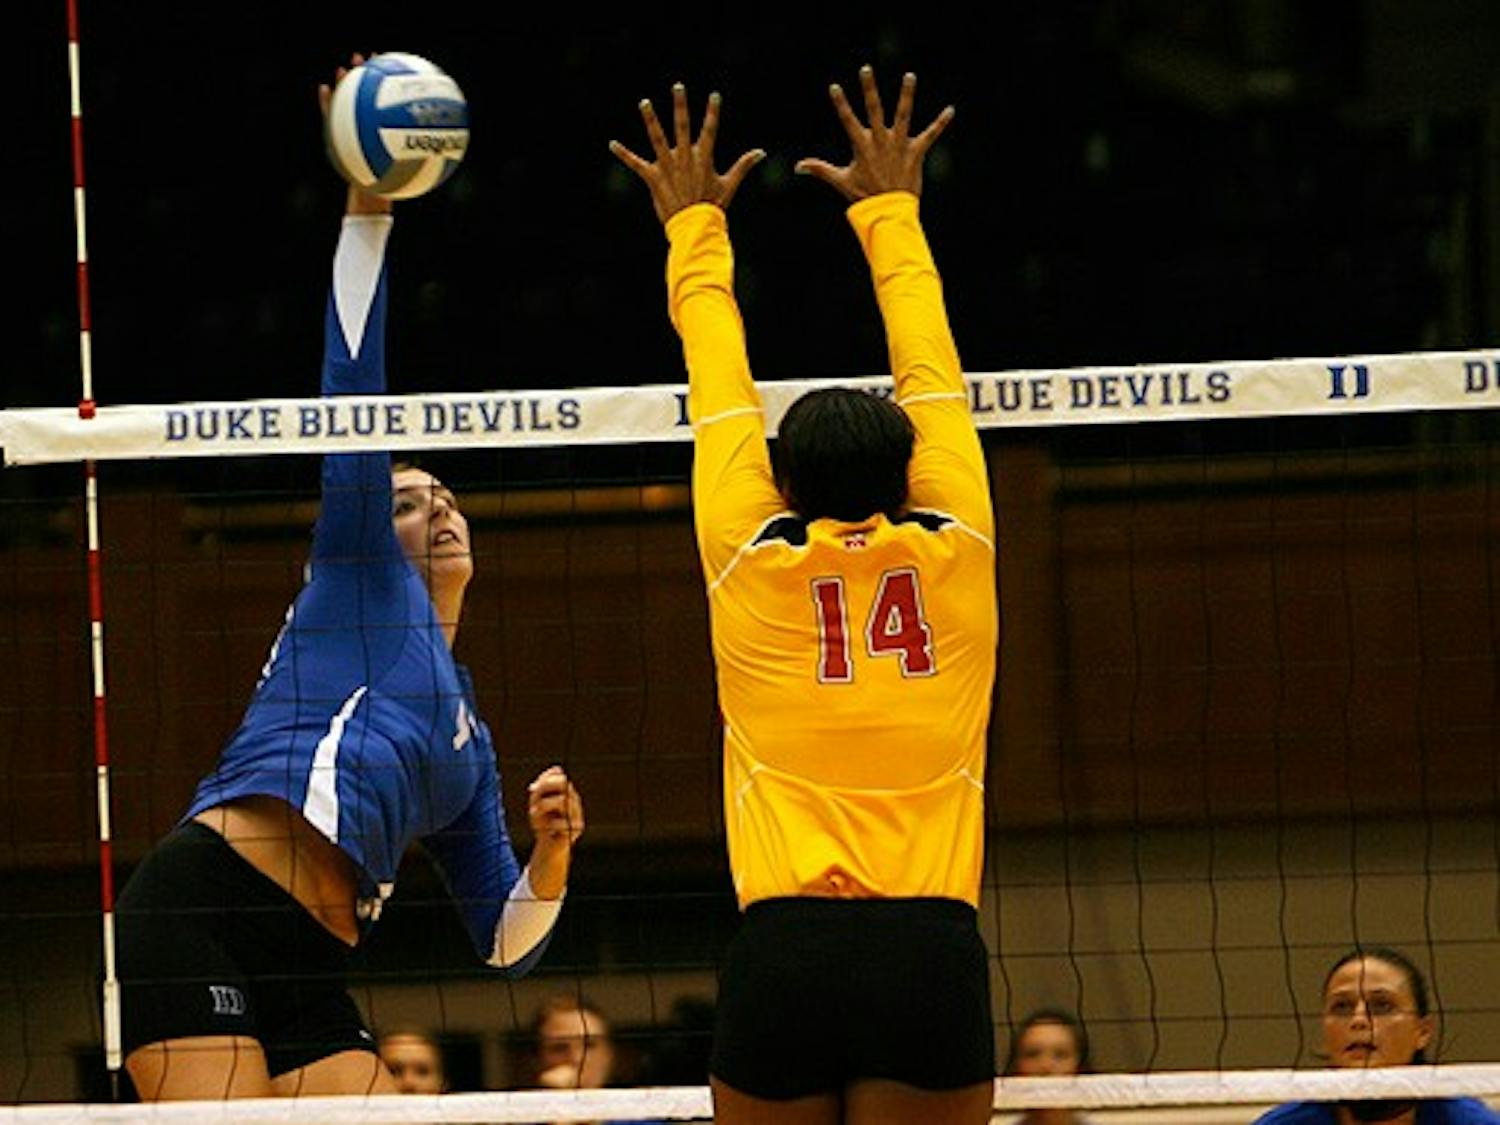 Amanda Robertson will lead a group of talented Duke outside hitters against the Tar Heels.